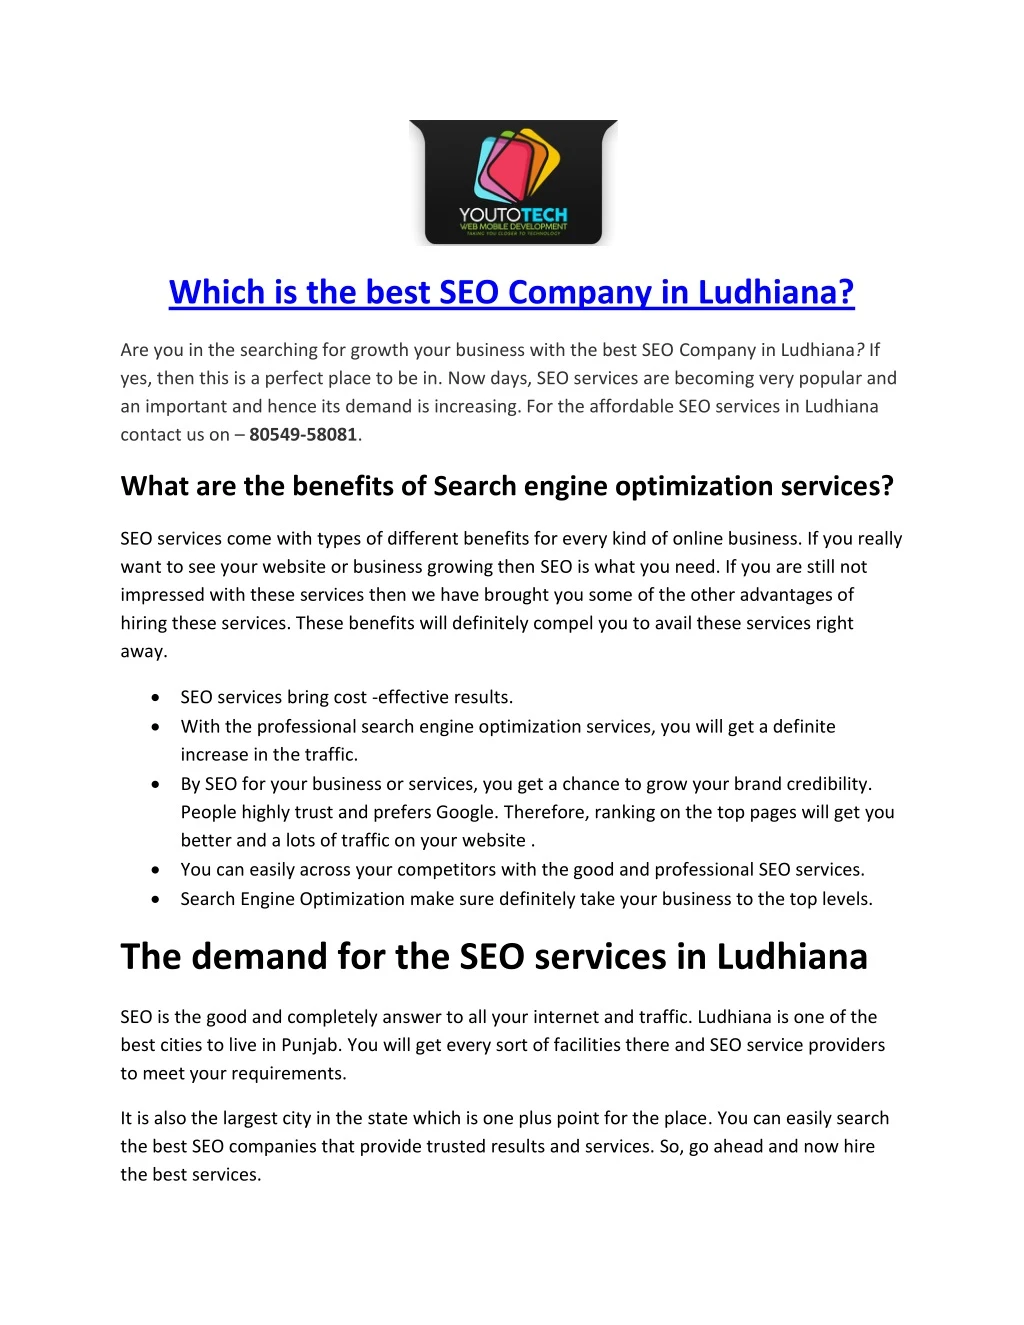 which is the best seo company in ludhiana